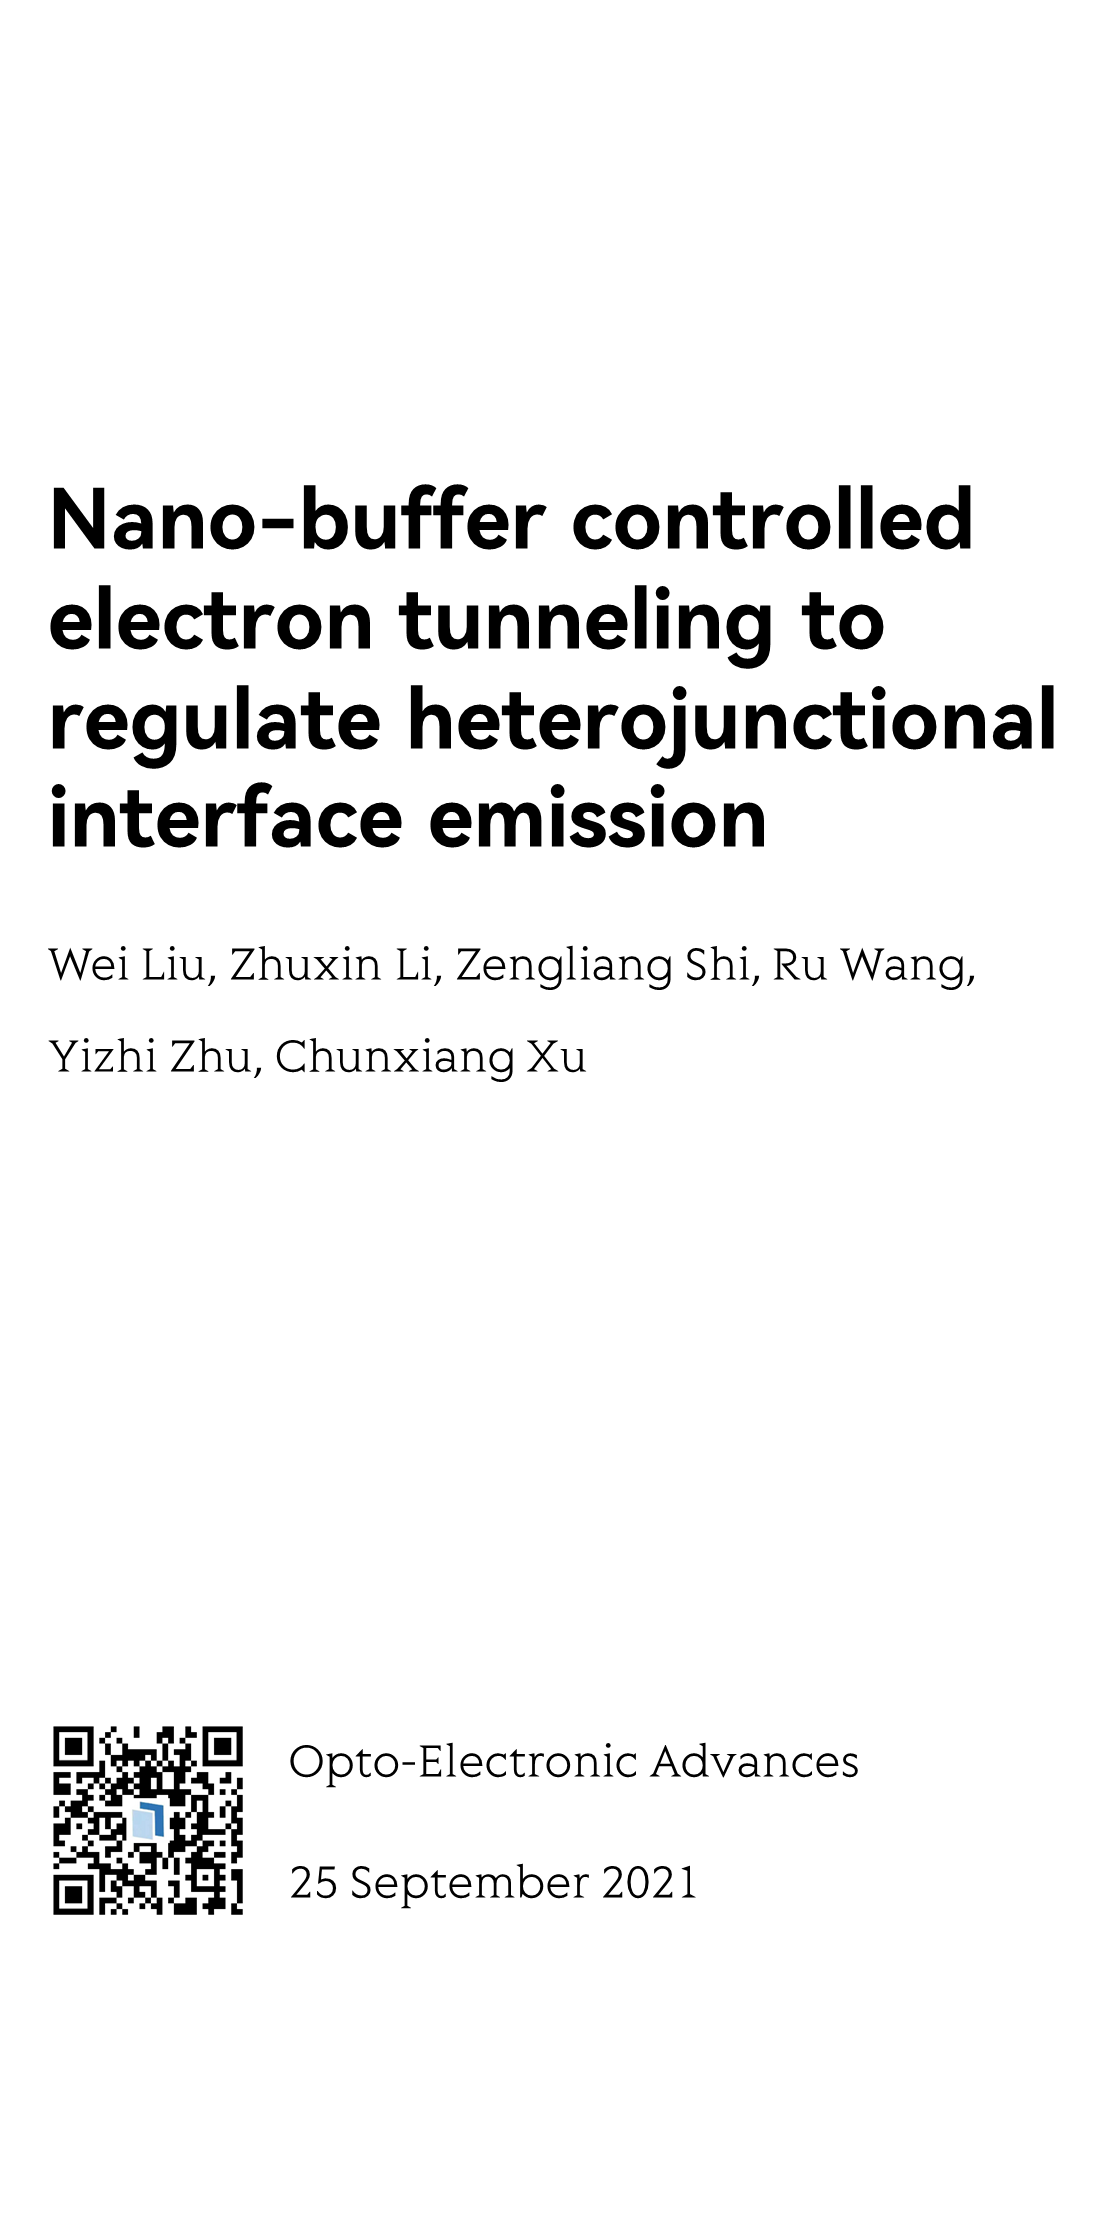 Nano-buffer controlled electron tunneling to regulate heterojunctional interface emission_1